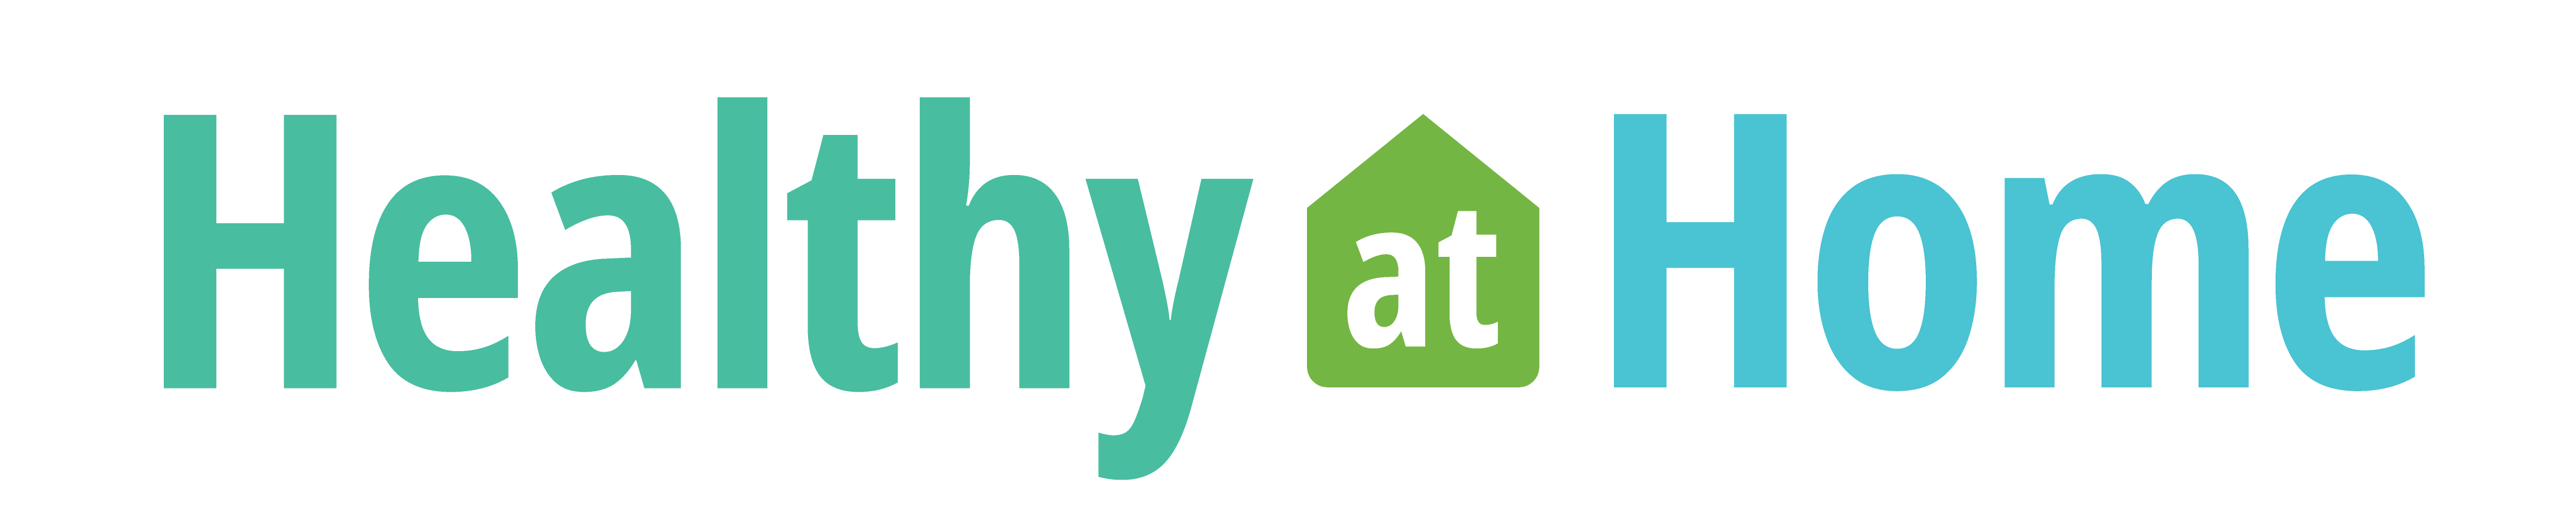 HealthyAtHome-logo 2.png